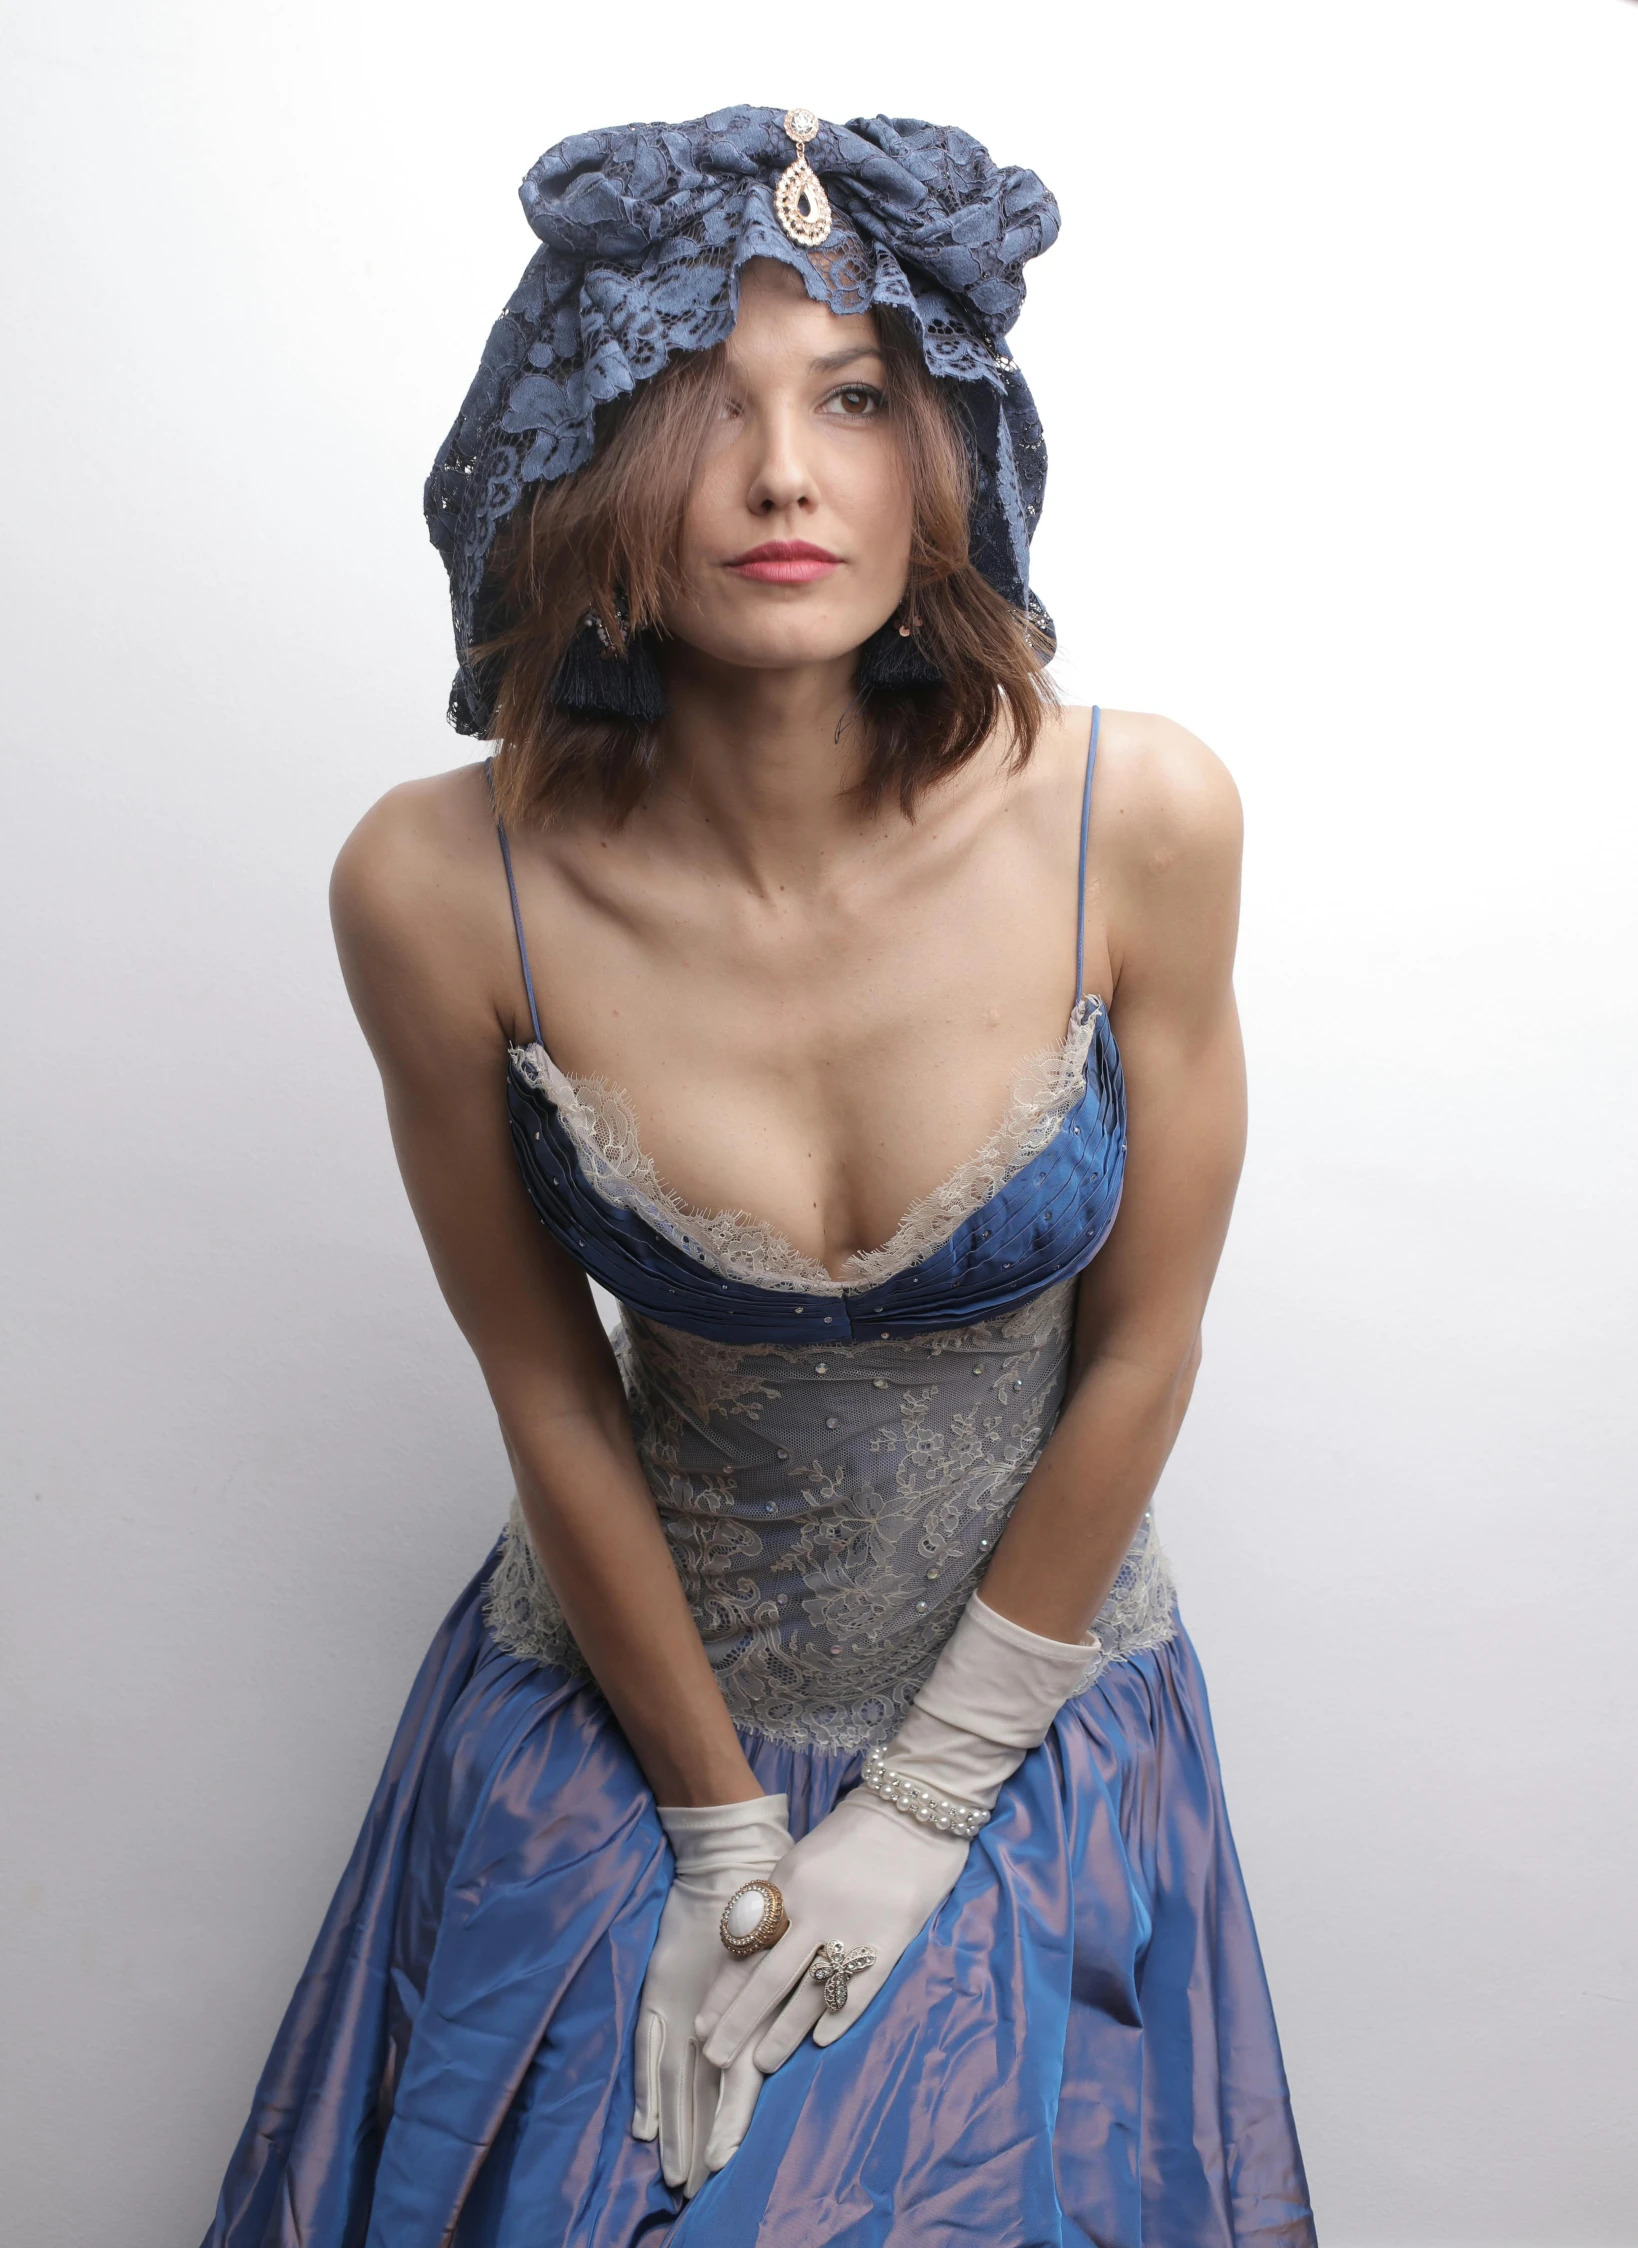 a woman in a blue dress posing for a picture, an album cover, inspired by Mikhail Vrubel, flickr, suit vest and top hat and gloves, gemma chan beautiful girl, thin aged 2 5, 5 0 0 px models